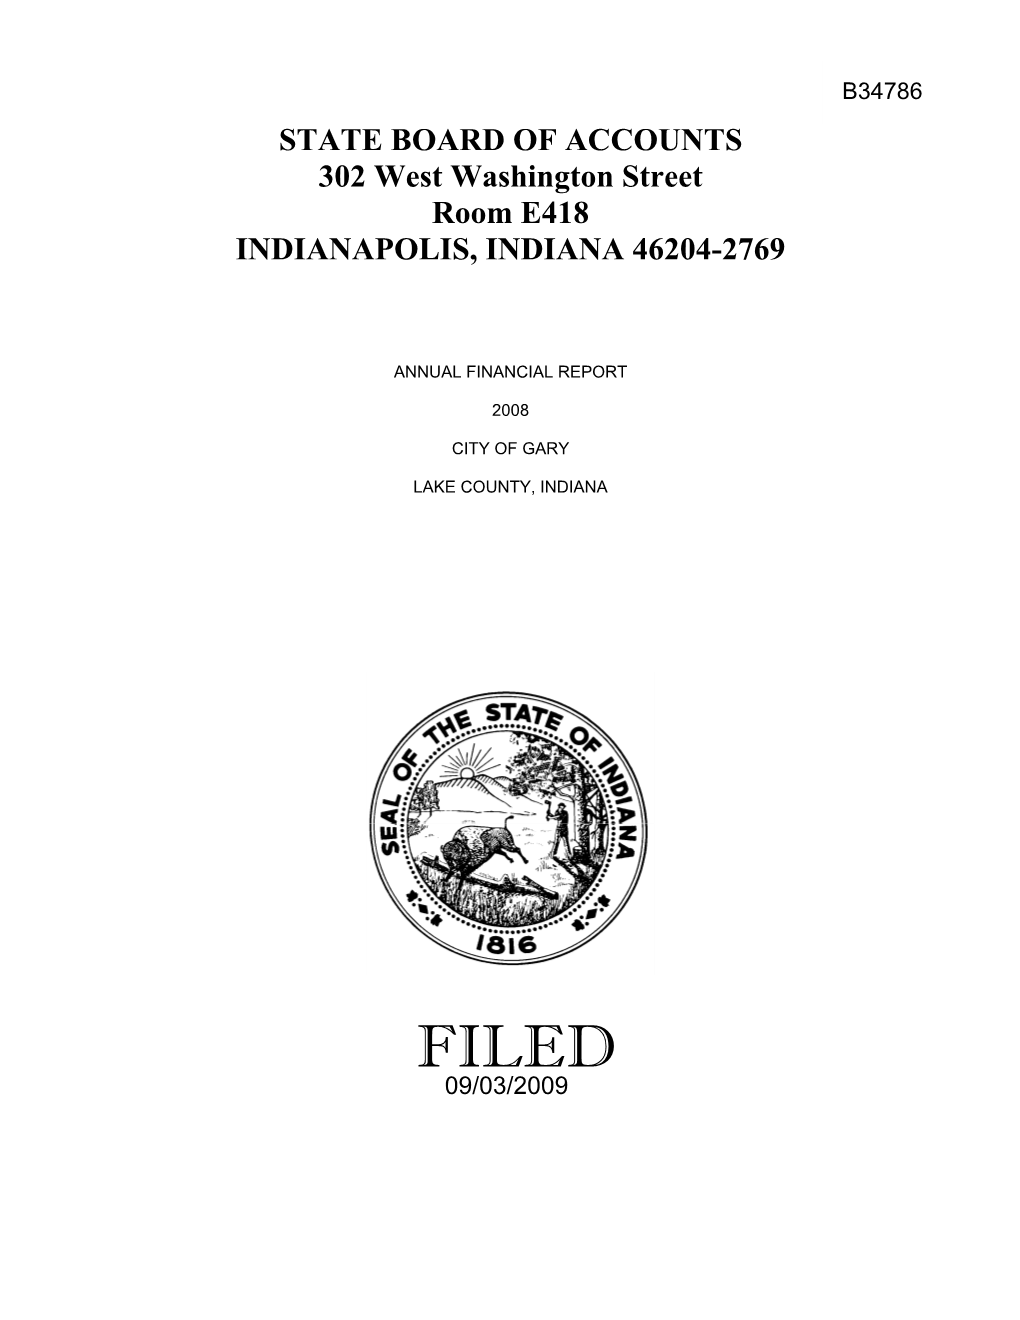 2008 Annual Financial Report